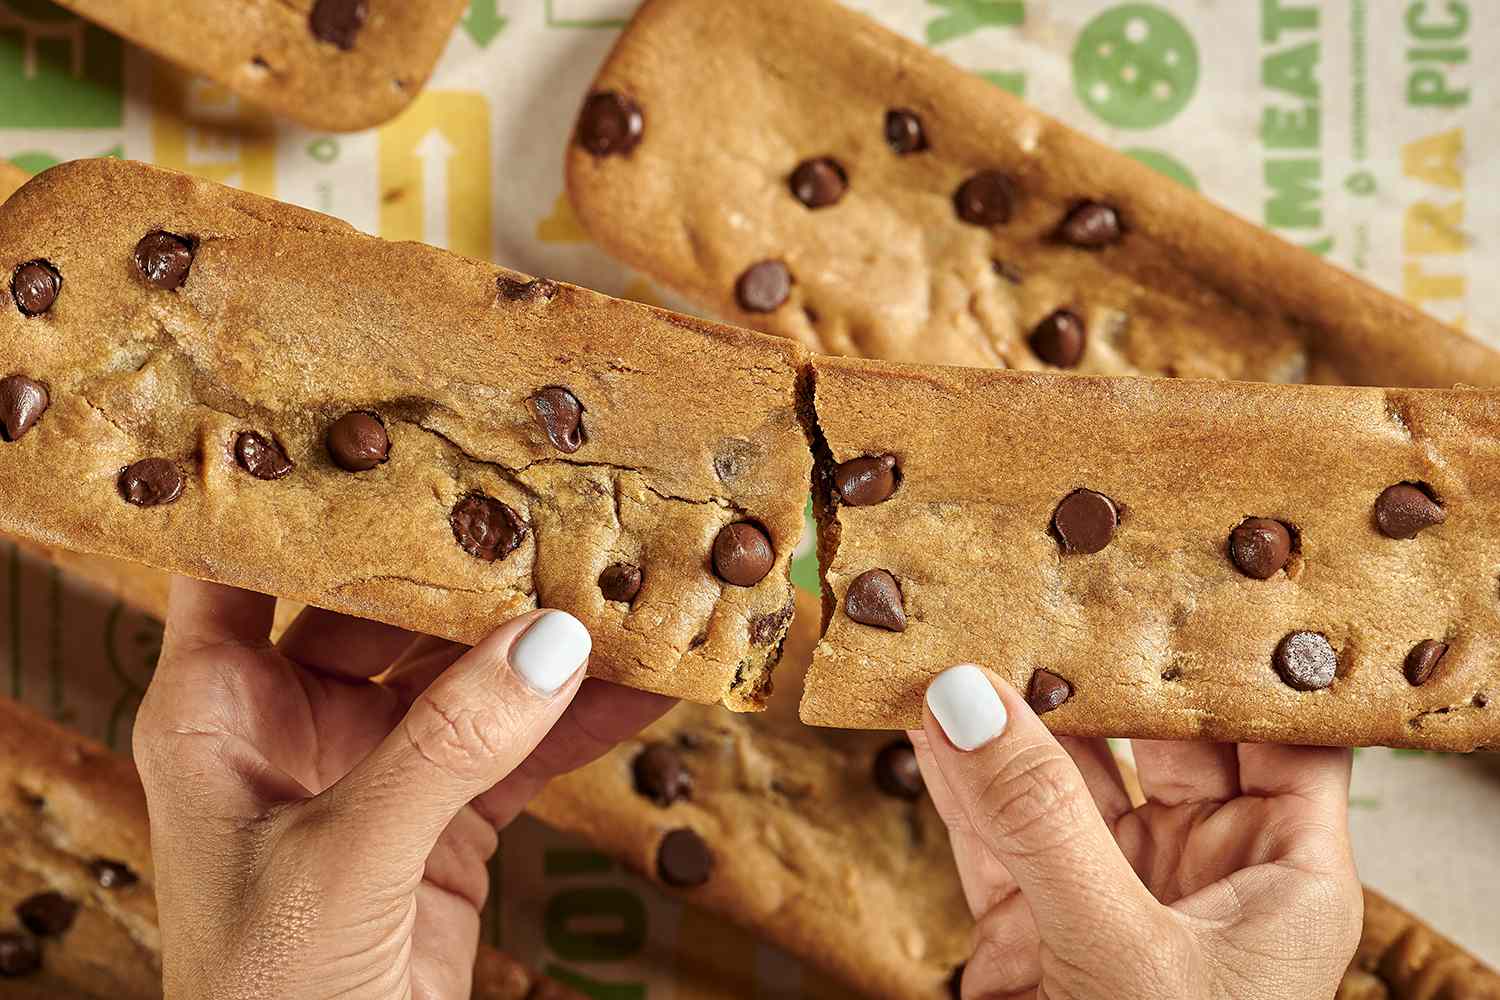 subway announces footlong cookies — and is giving them out for free on monday